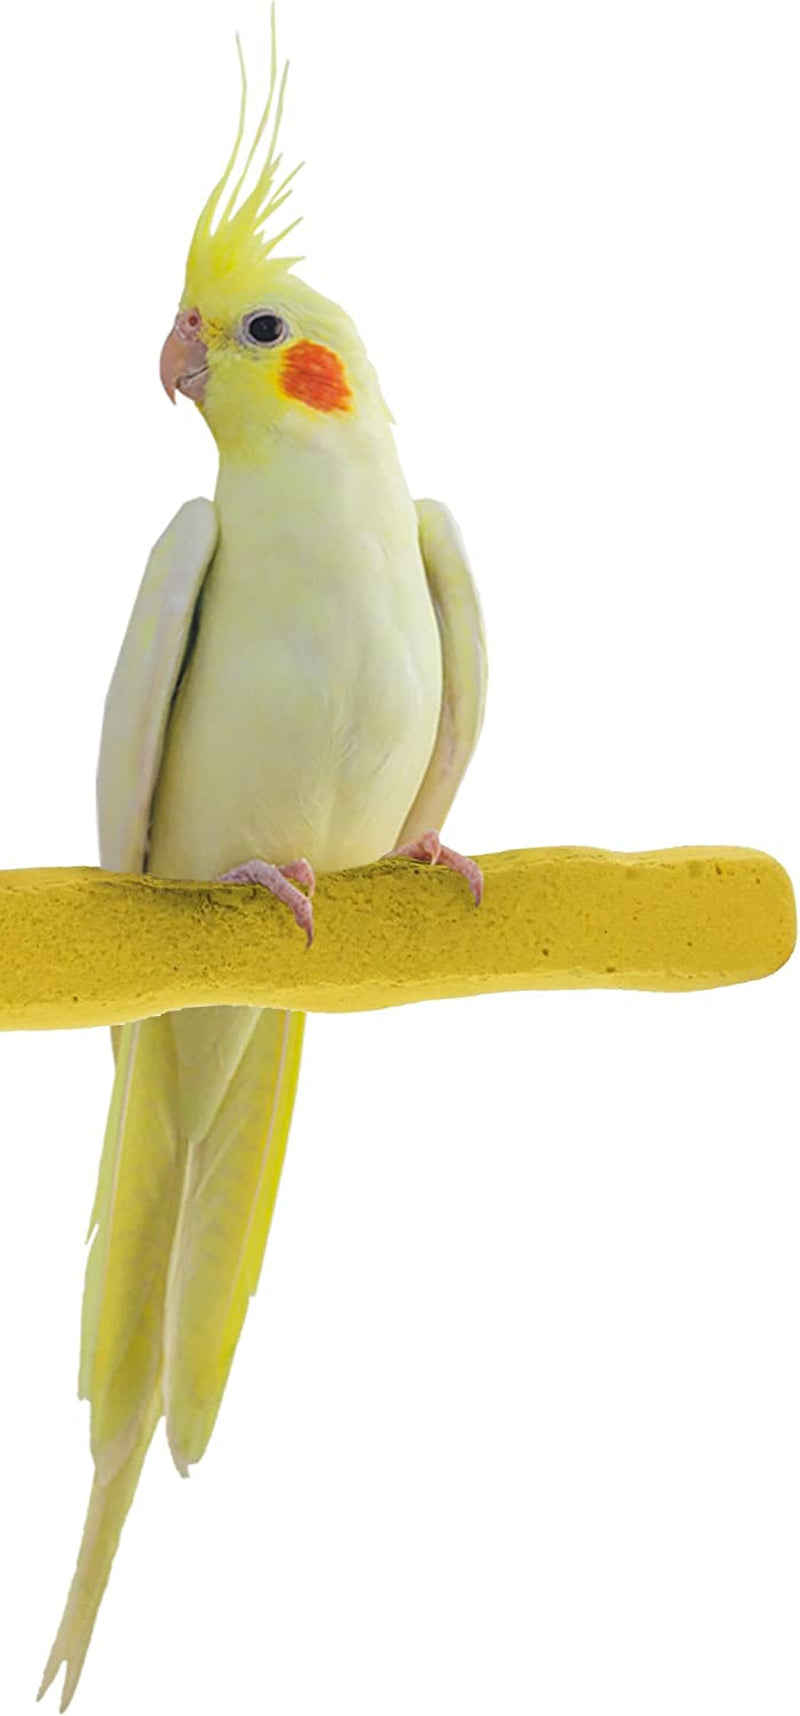 Sweet Feet and Beak Comfort Grip Safety Perch for Bird Cages - Patented Pumice Perch for Birds to Keep Nails and Beaks in Top Condition - Safe Easy to Install Bird Cage Accessories - M 8.5" Animals & Pet Supplies > Pet Supplies > Bird Supplies Sweet Feet and Beak Yellow Small 6.5" 